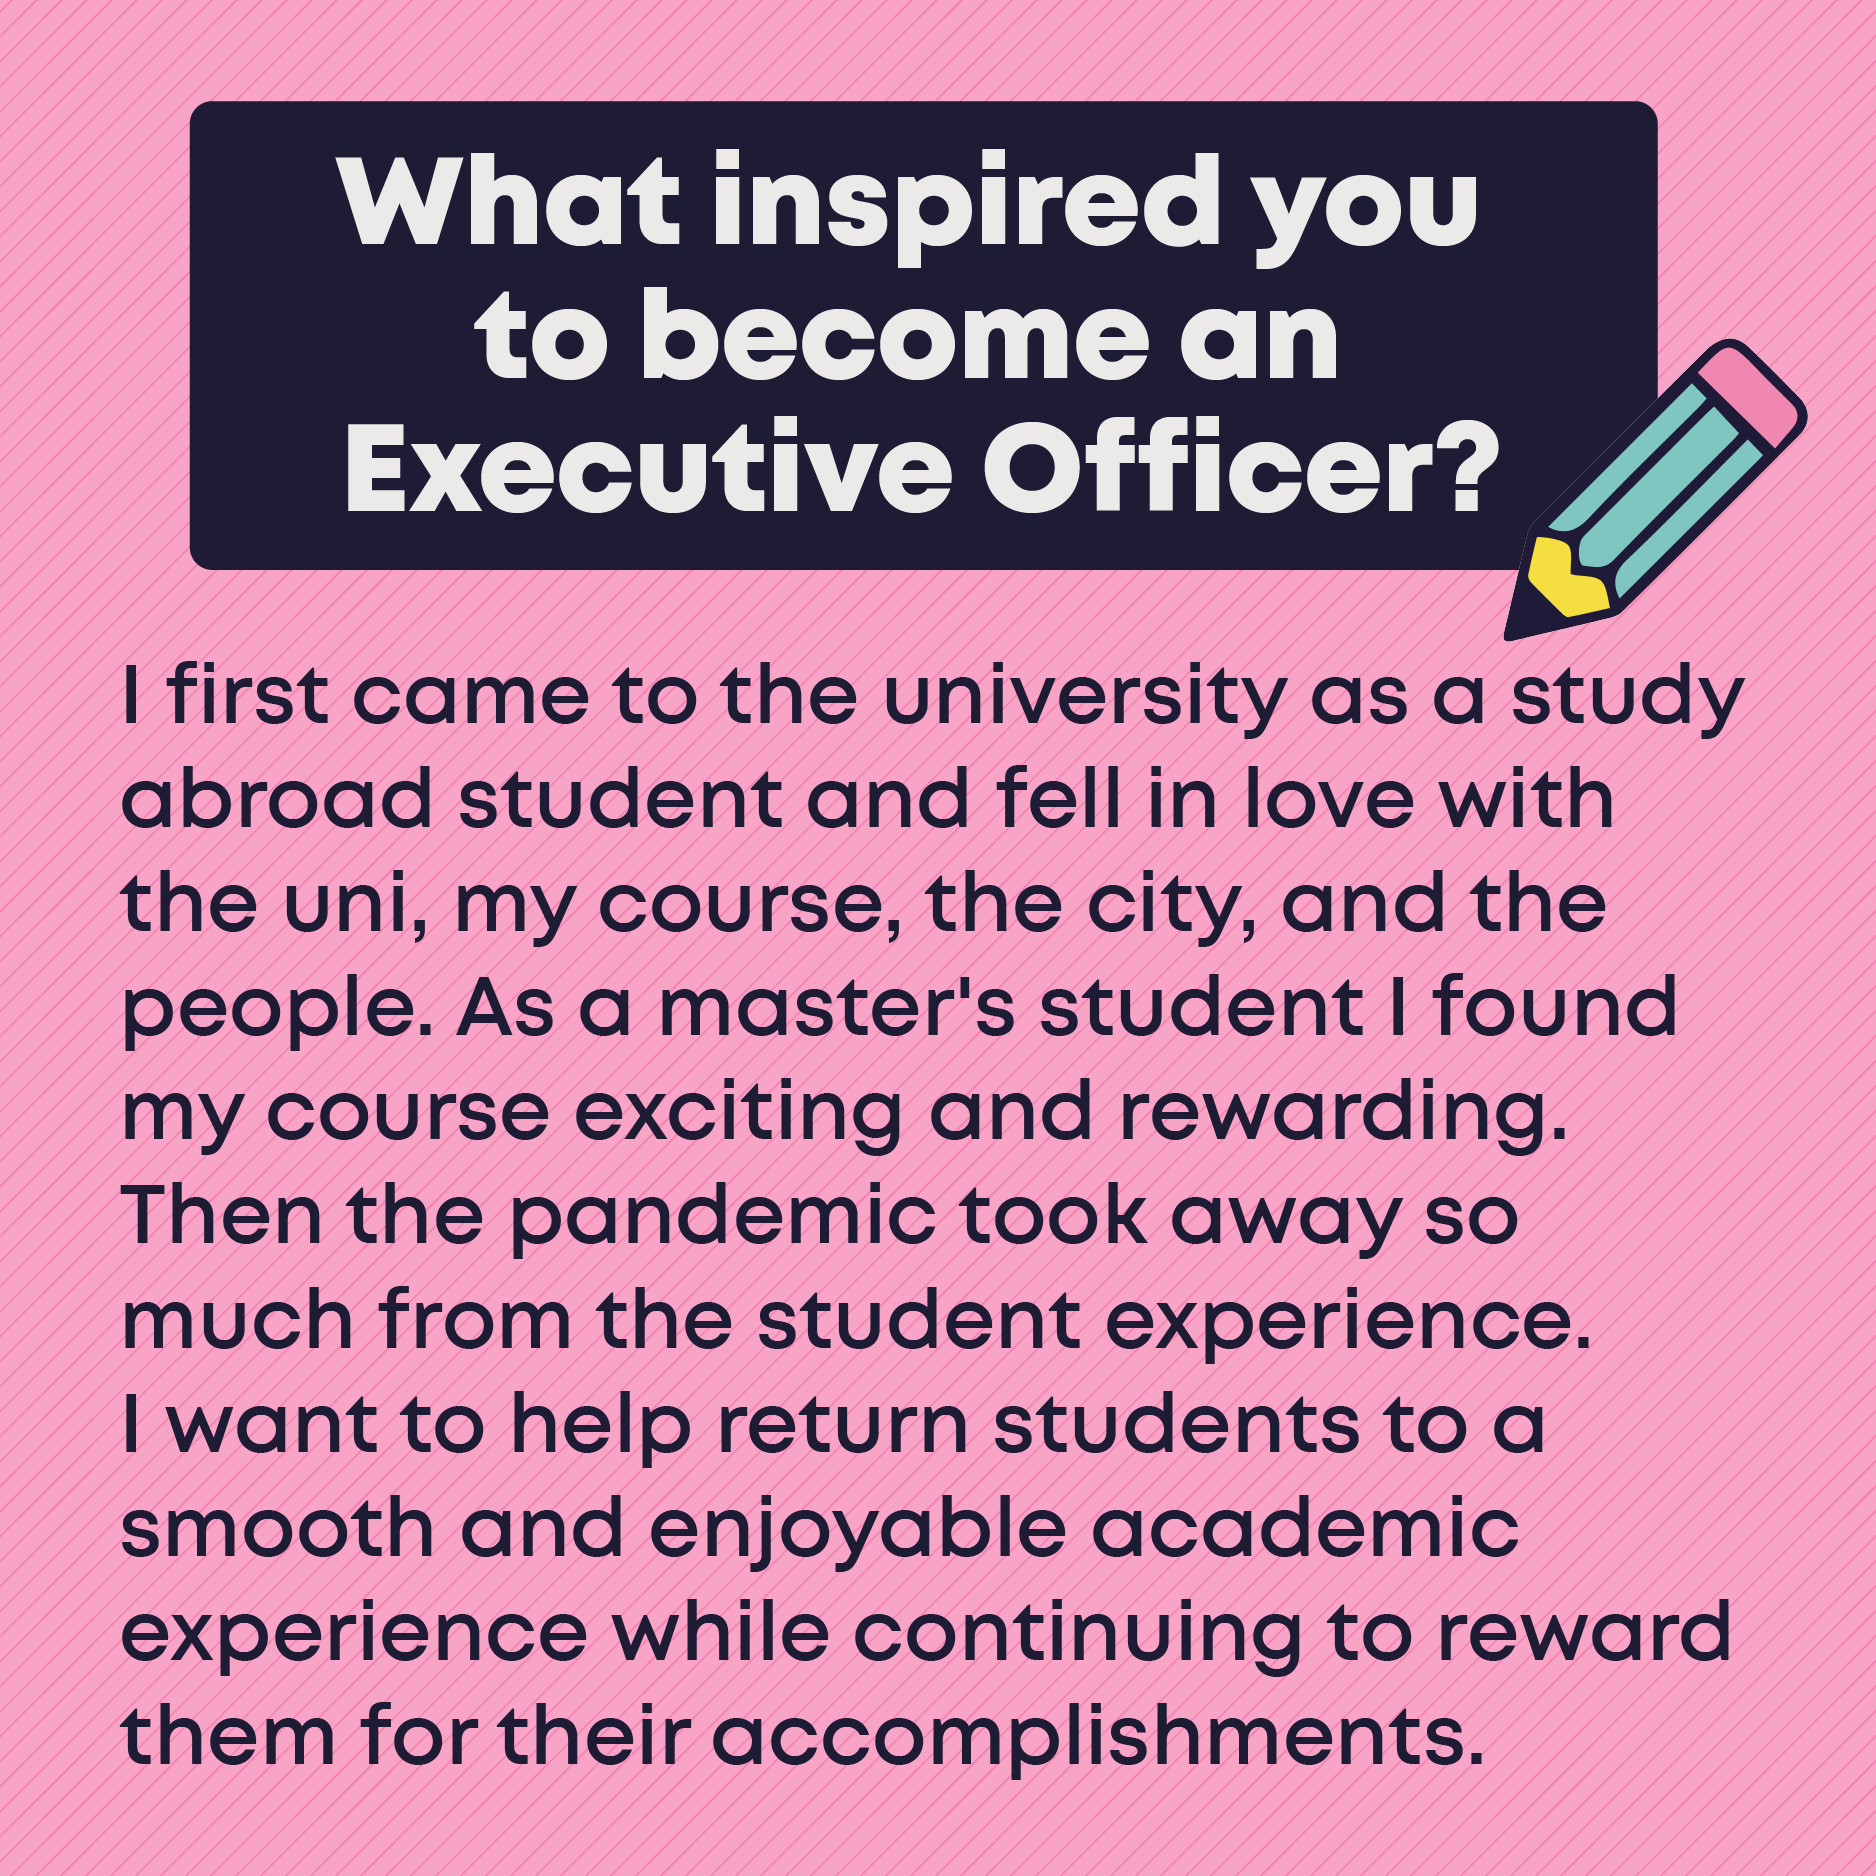 What inspired you to become an Executive Officer? I first came to the university as a study abroad student and fell in love with the uni, my course, the city, and the people. As a master's student I found my course exciting and rewarding. Then the pandemic took away so much from the student experience.  I want to help return students to a smooth and enjoyable academic experience while continuing to reward them for their accomplishments. 